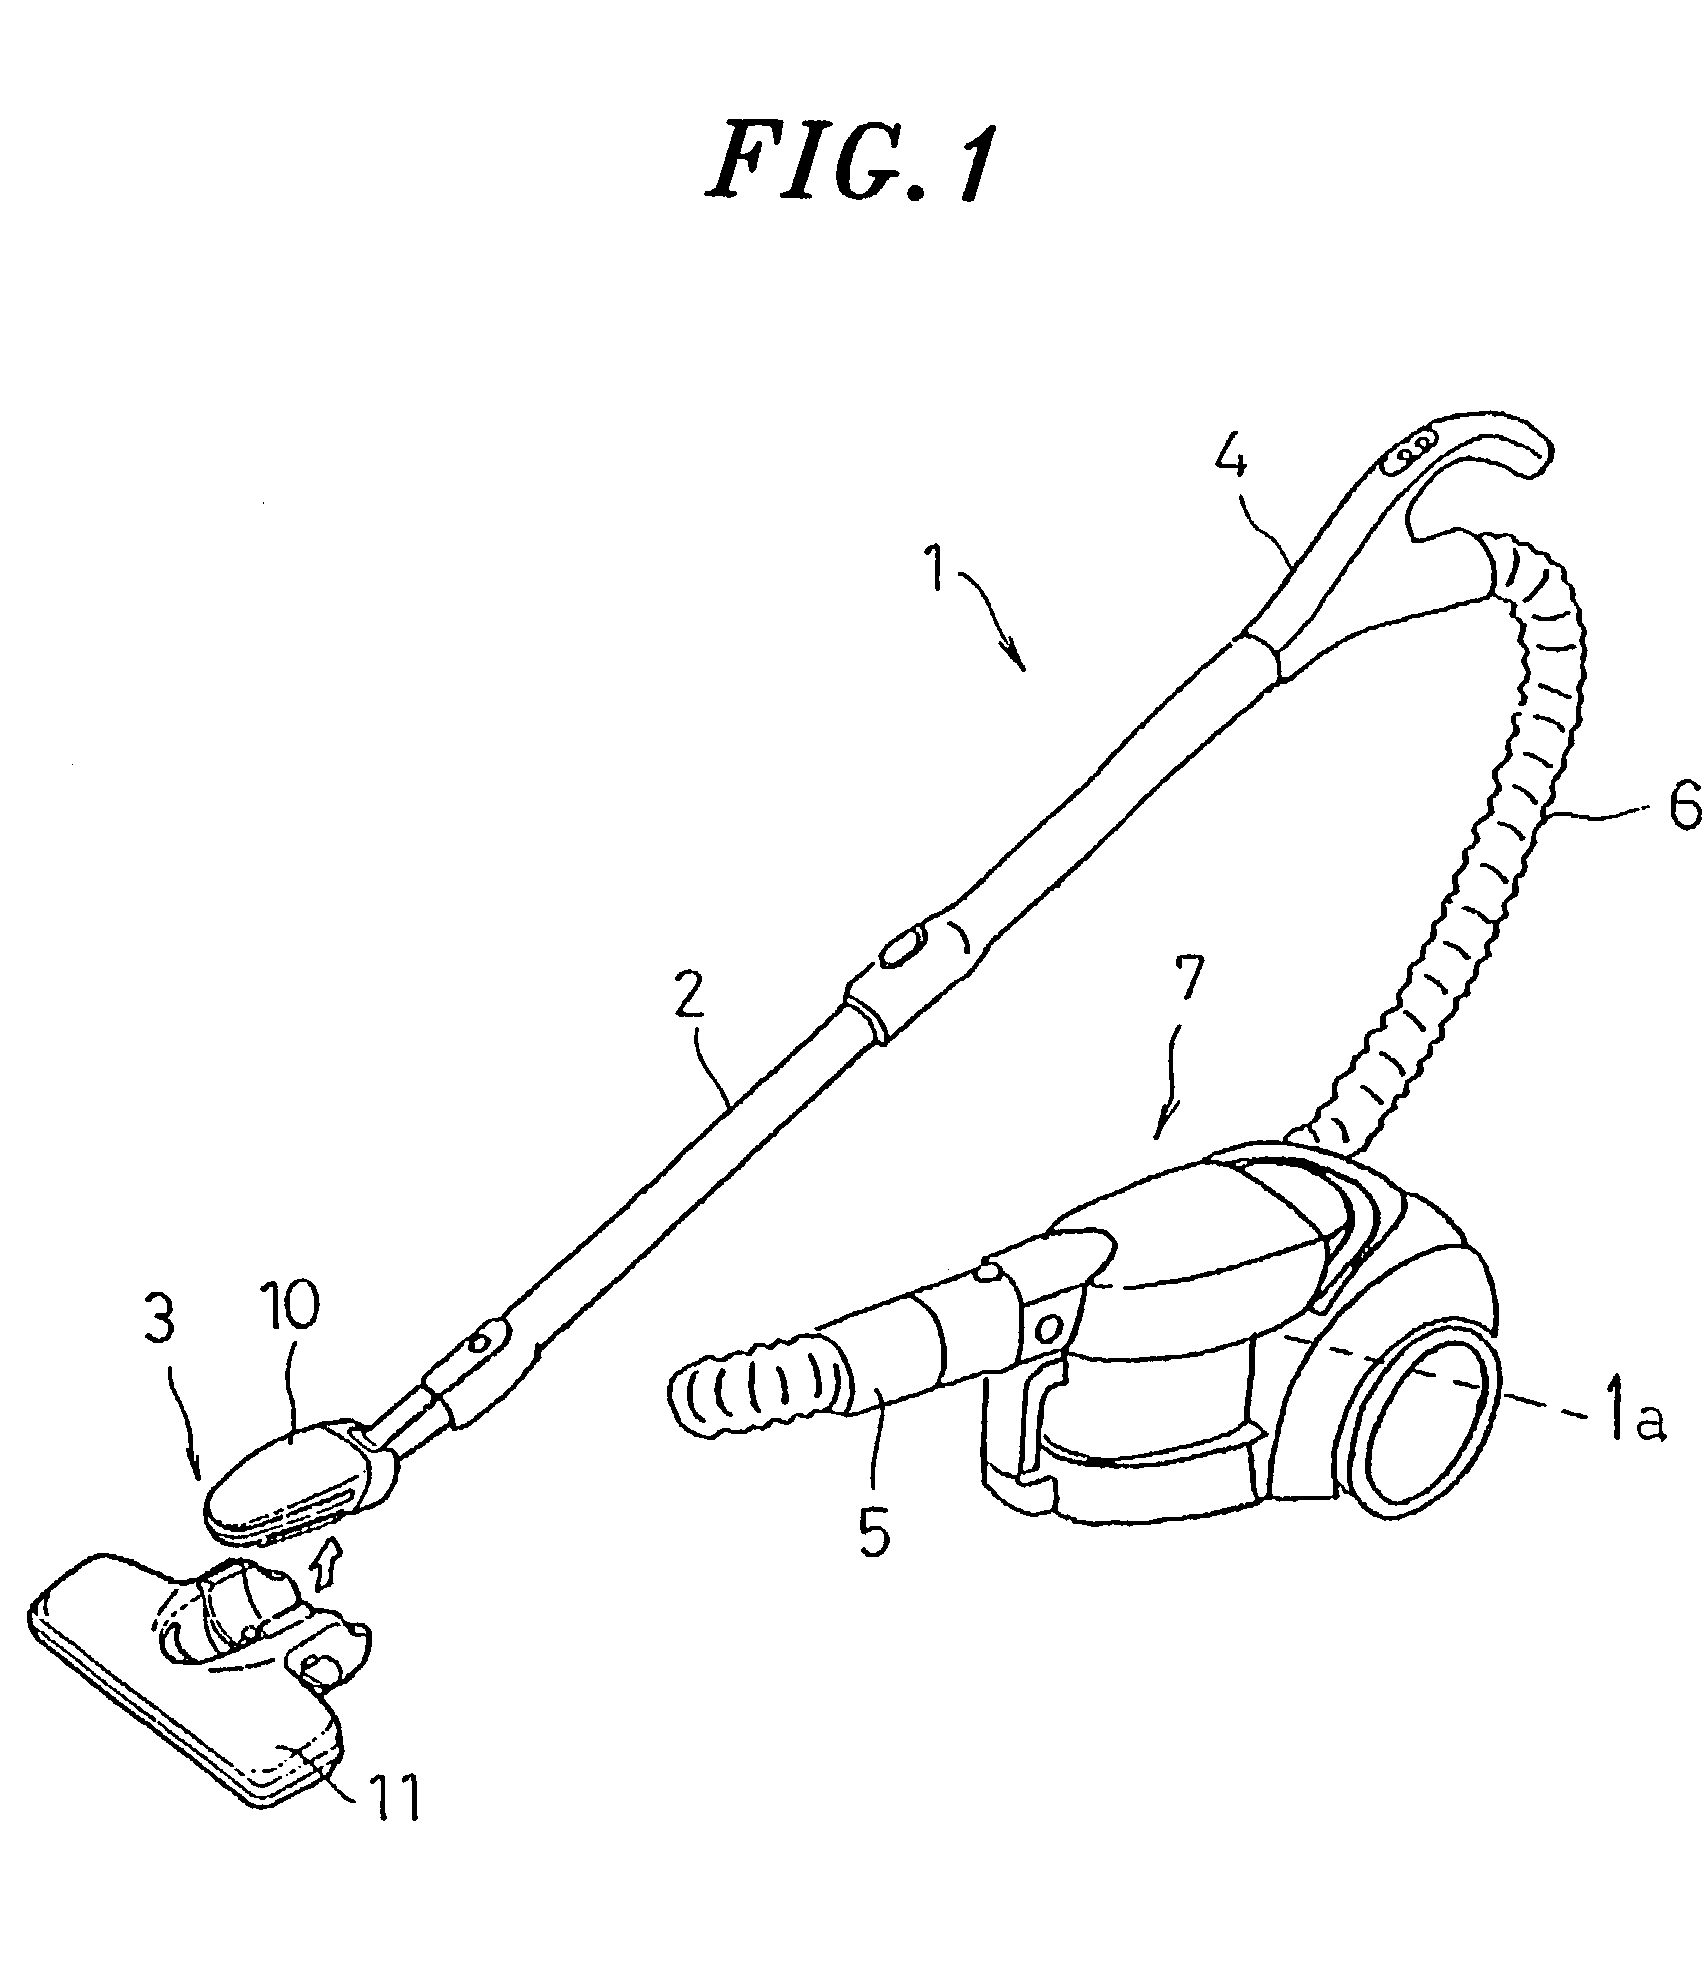 Vacuum cleaner and suction nozzle employed therein